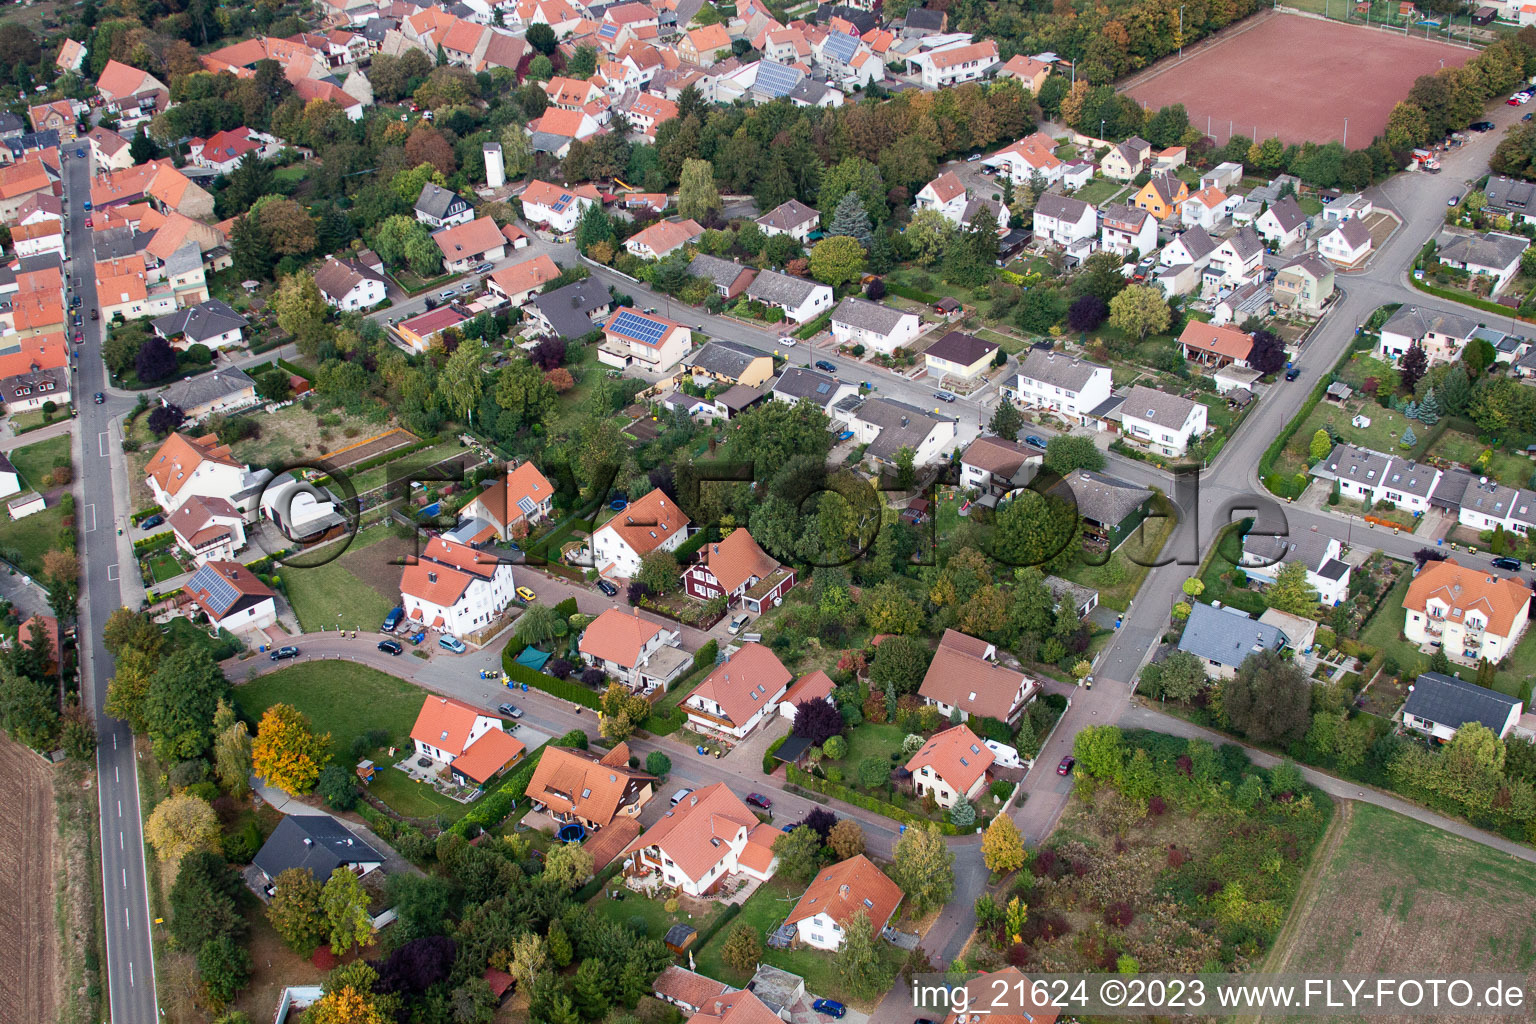 Aerial photograpy of Eppelsheim in the state Rhineland-Palatinate, Germany